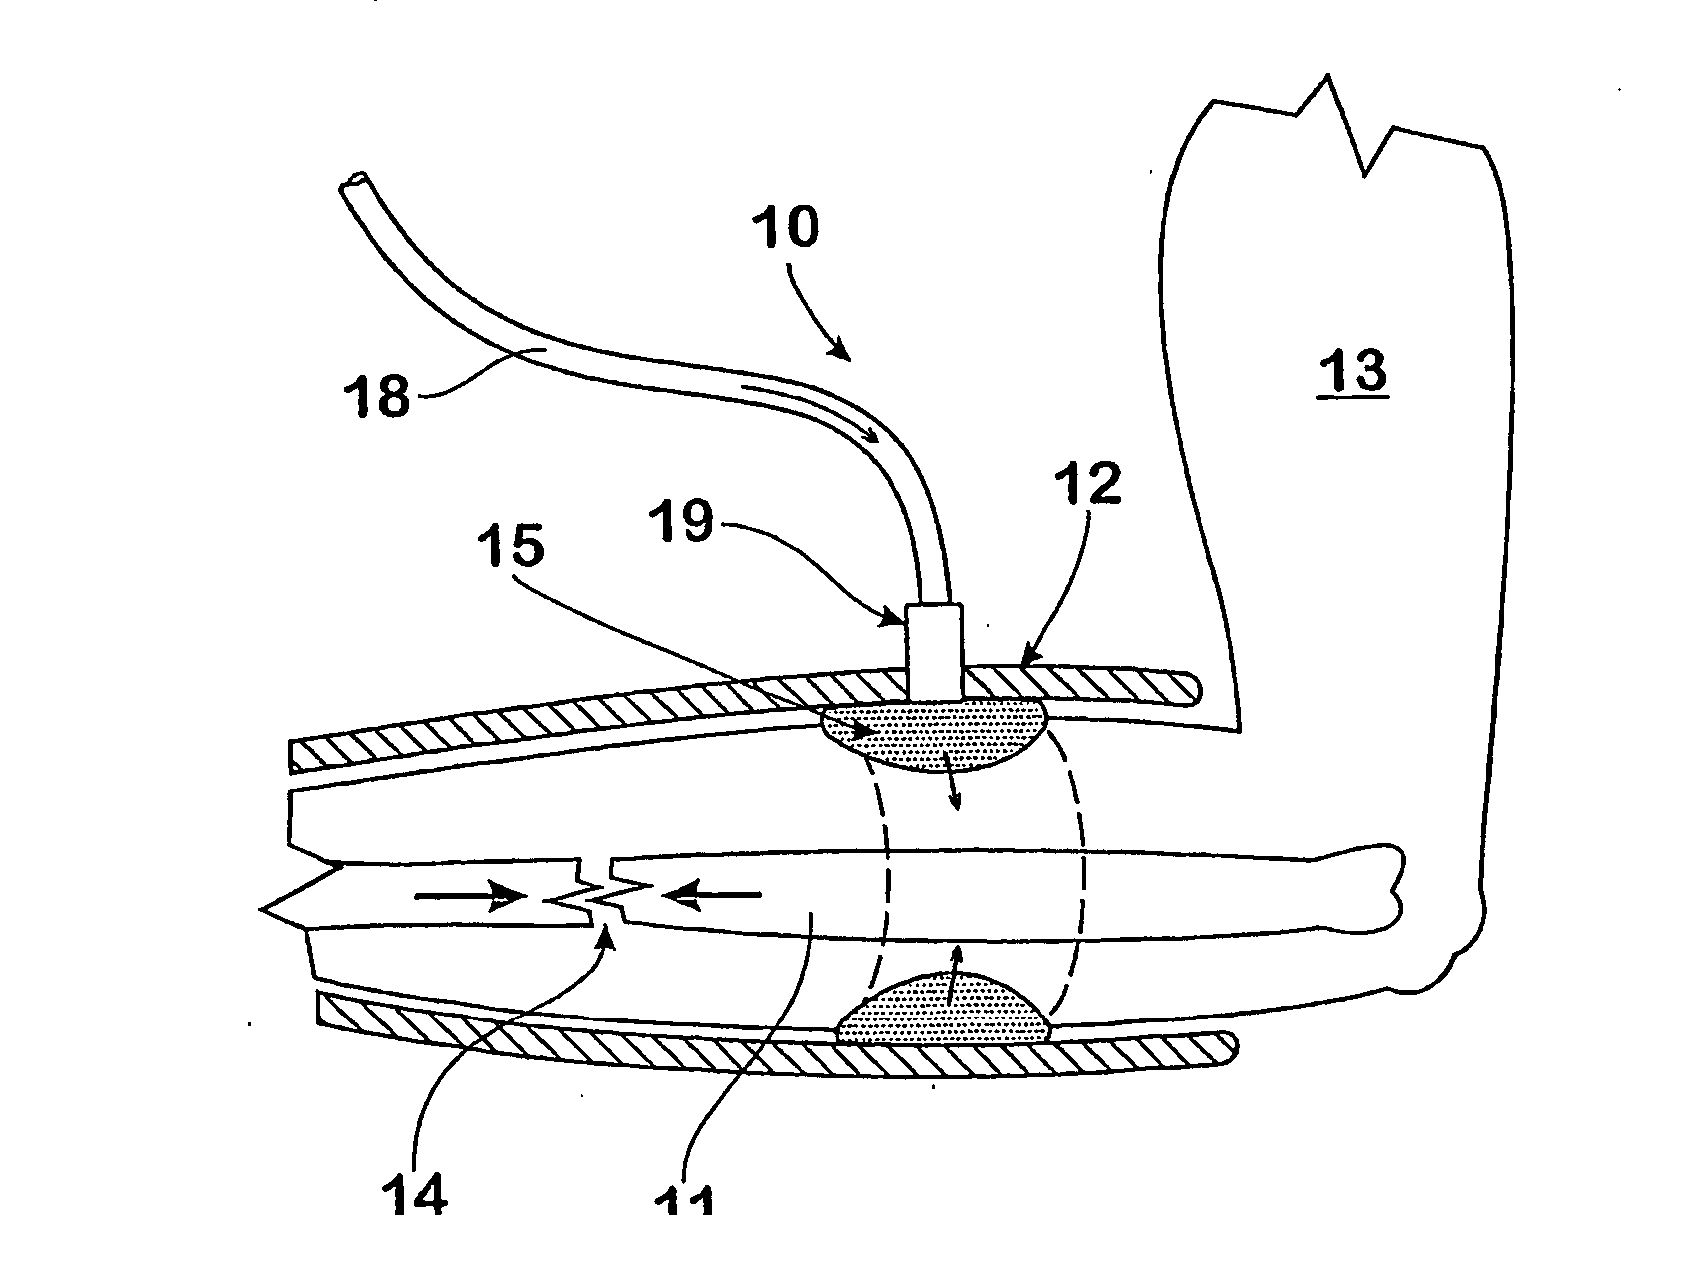 Apparatus and method for treatment of long bone fractures